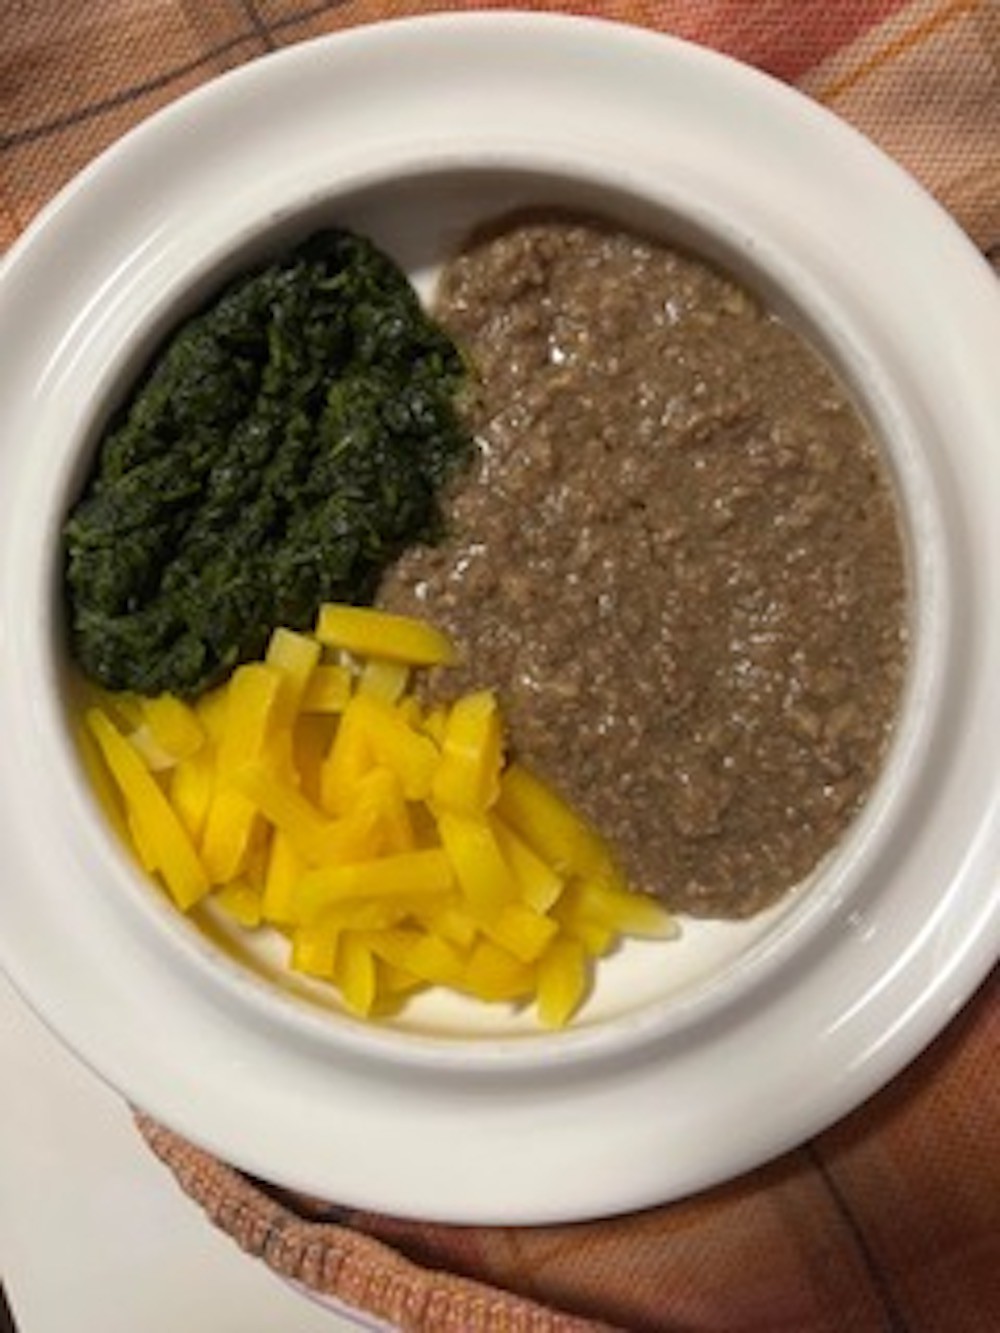 A photo of three types of food on a white plastic plate. The food is unidentifiable and consists of: yellow vegetable wedges, a dark green pulp, and a watery brown gruel.